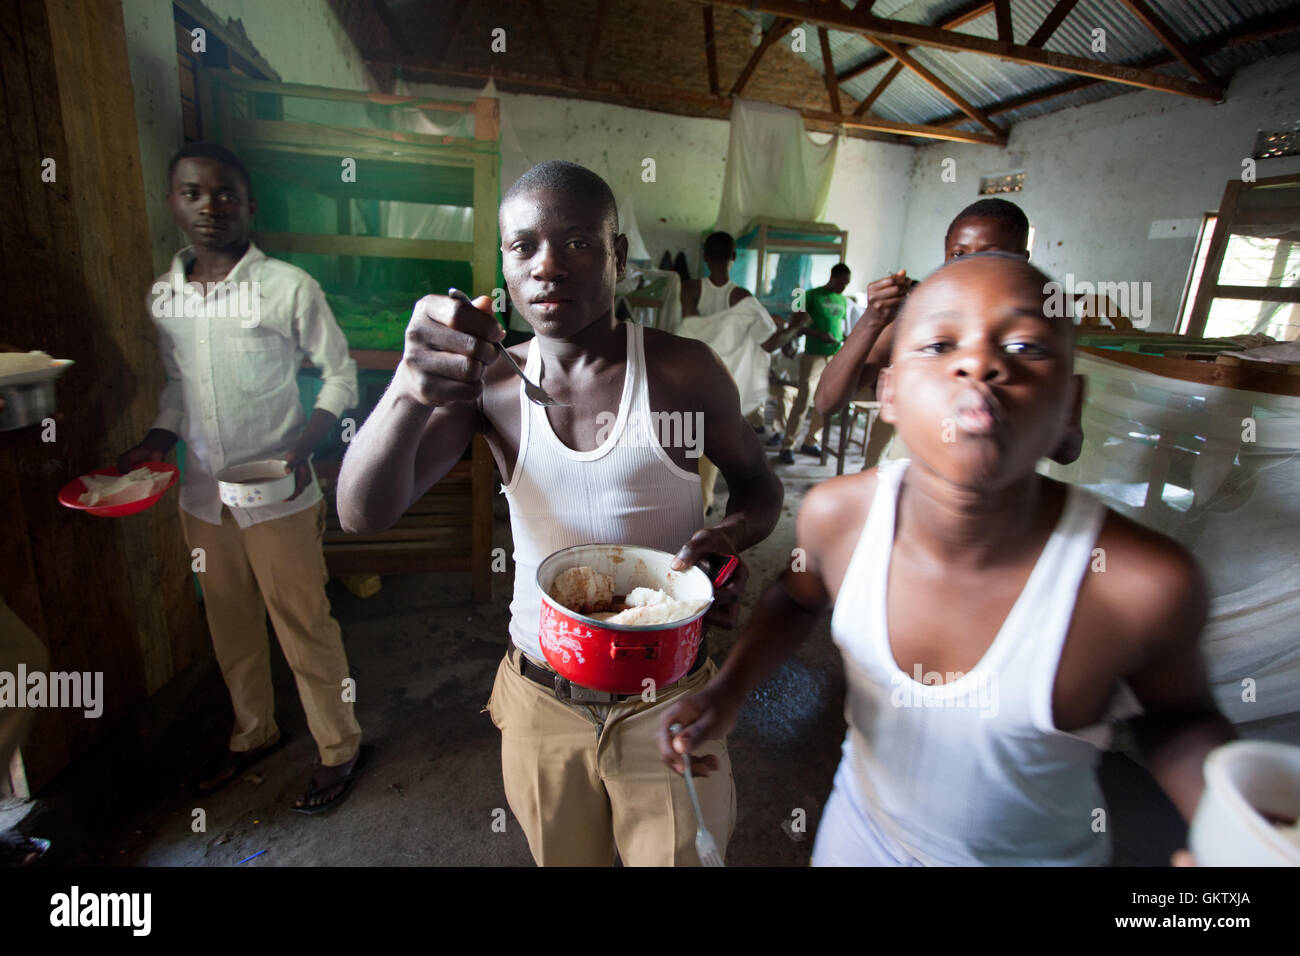 A group of boys eat lunch inside their living quarters at school in Uganda Stock Photo